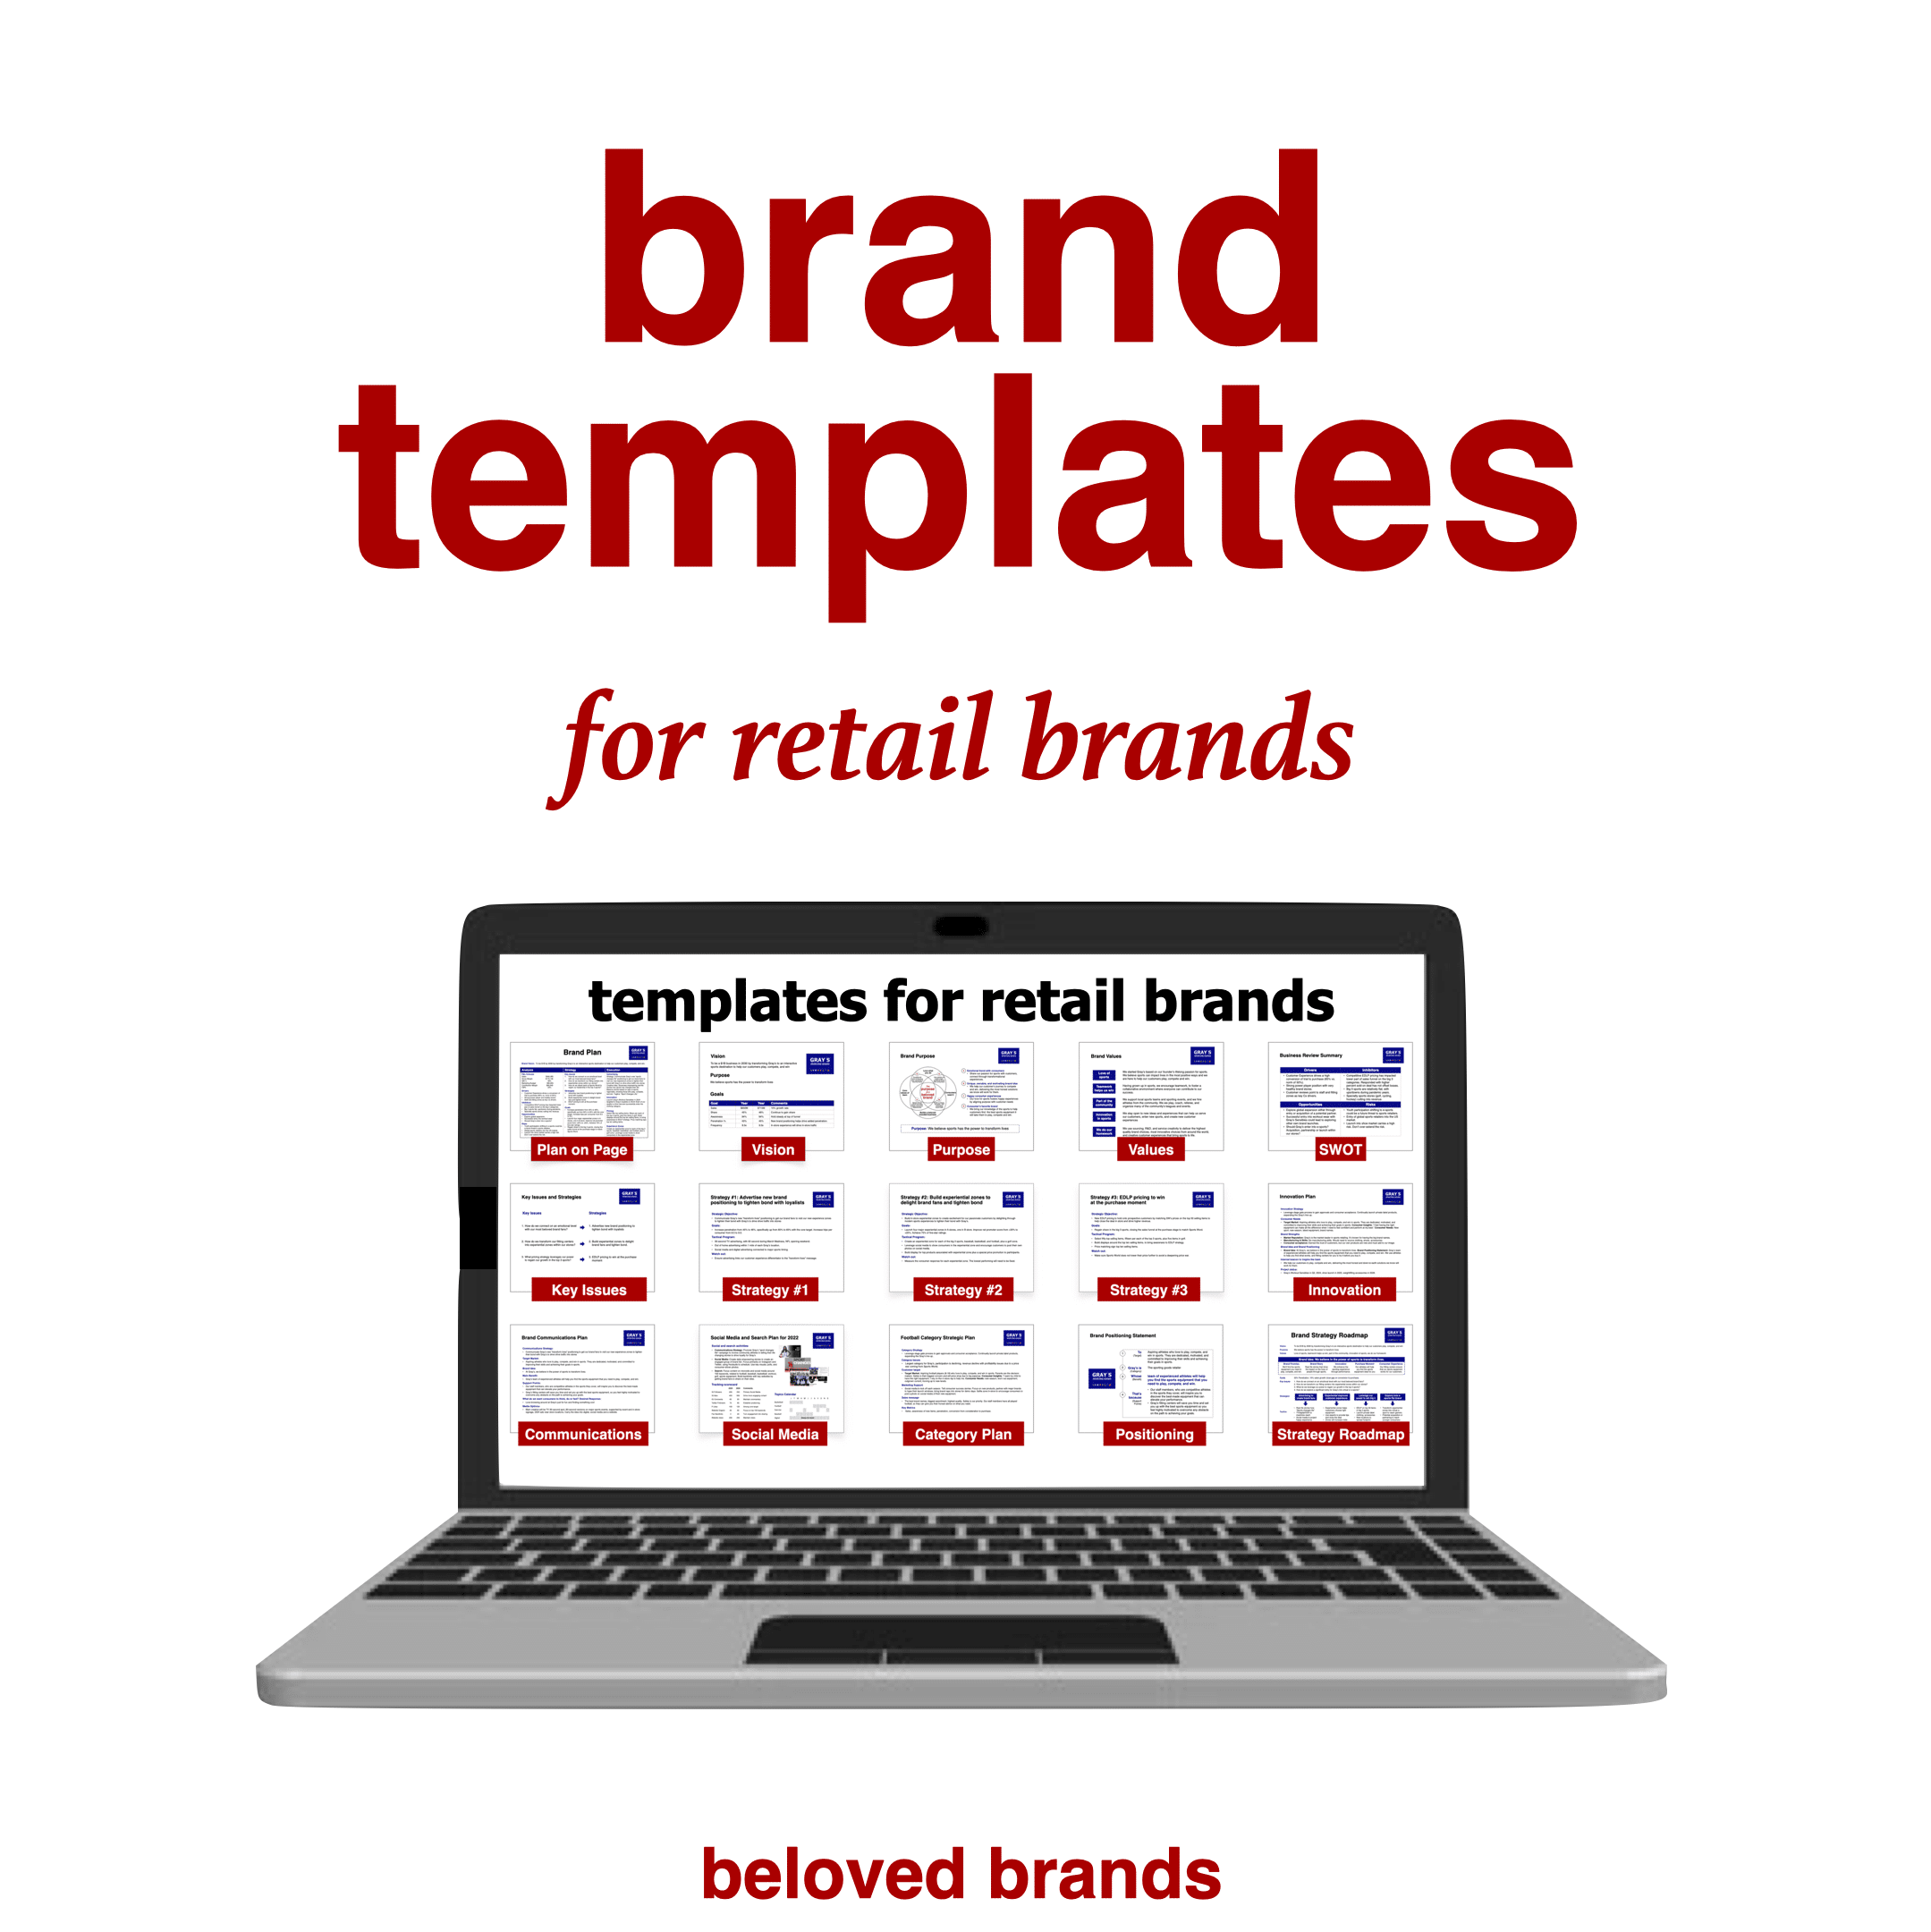 brand templates for retail brands